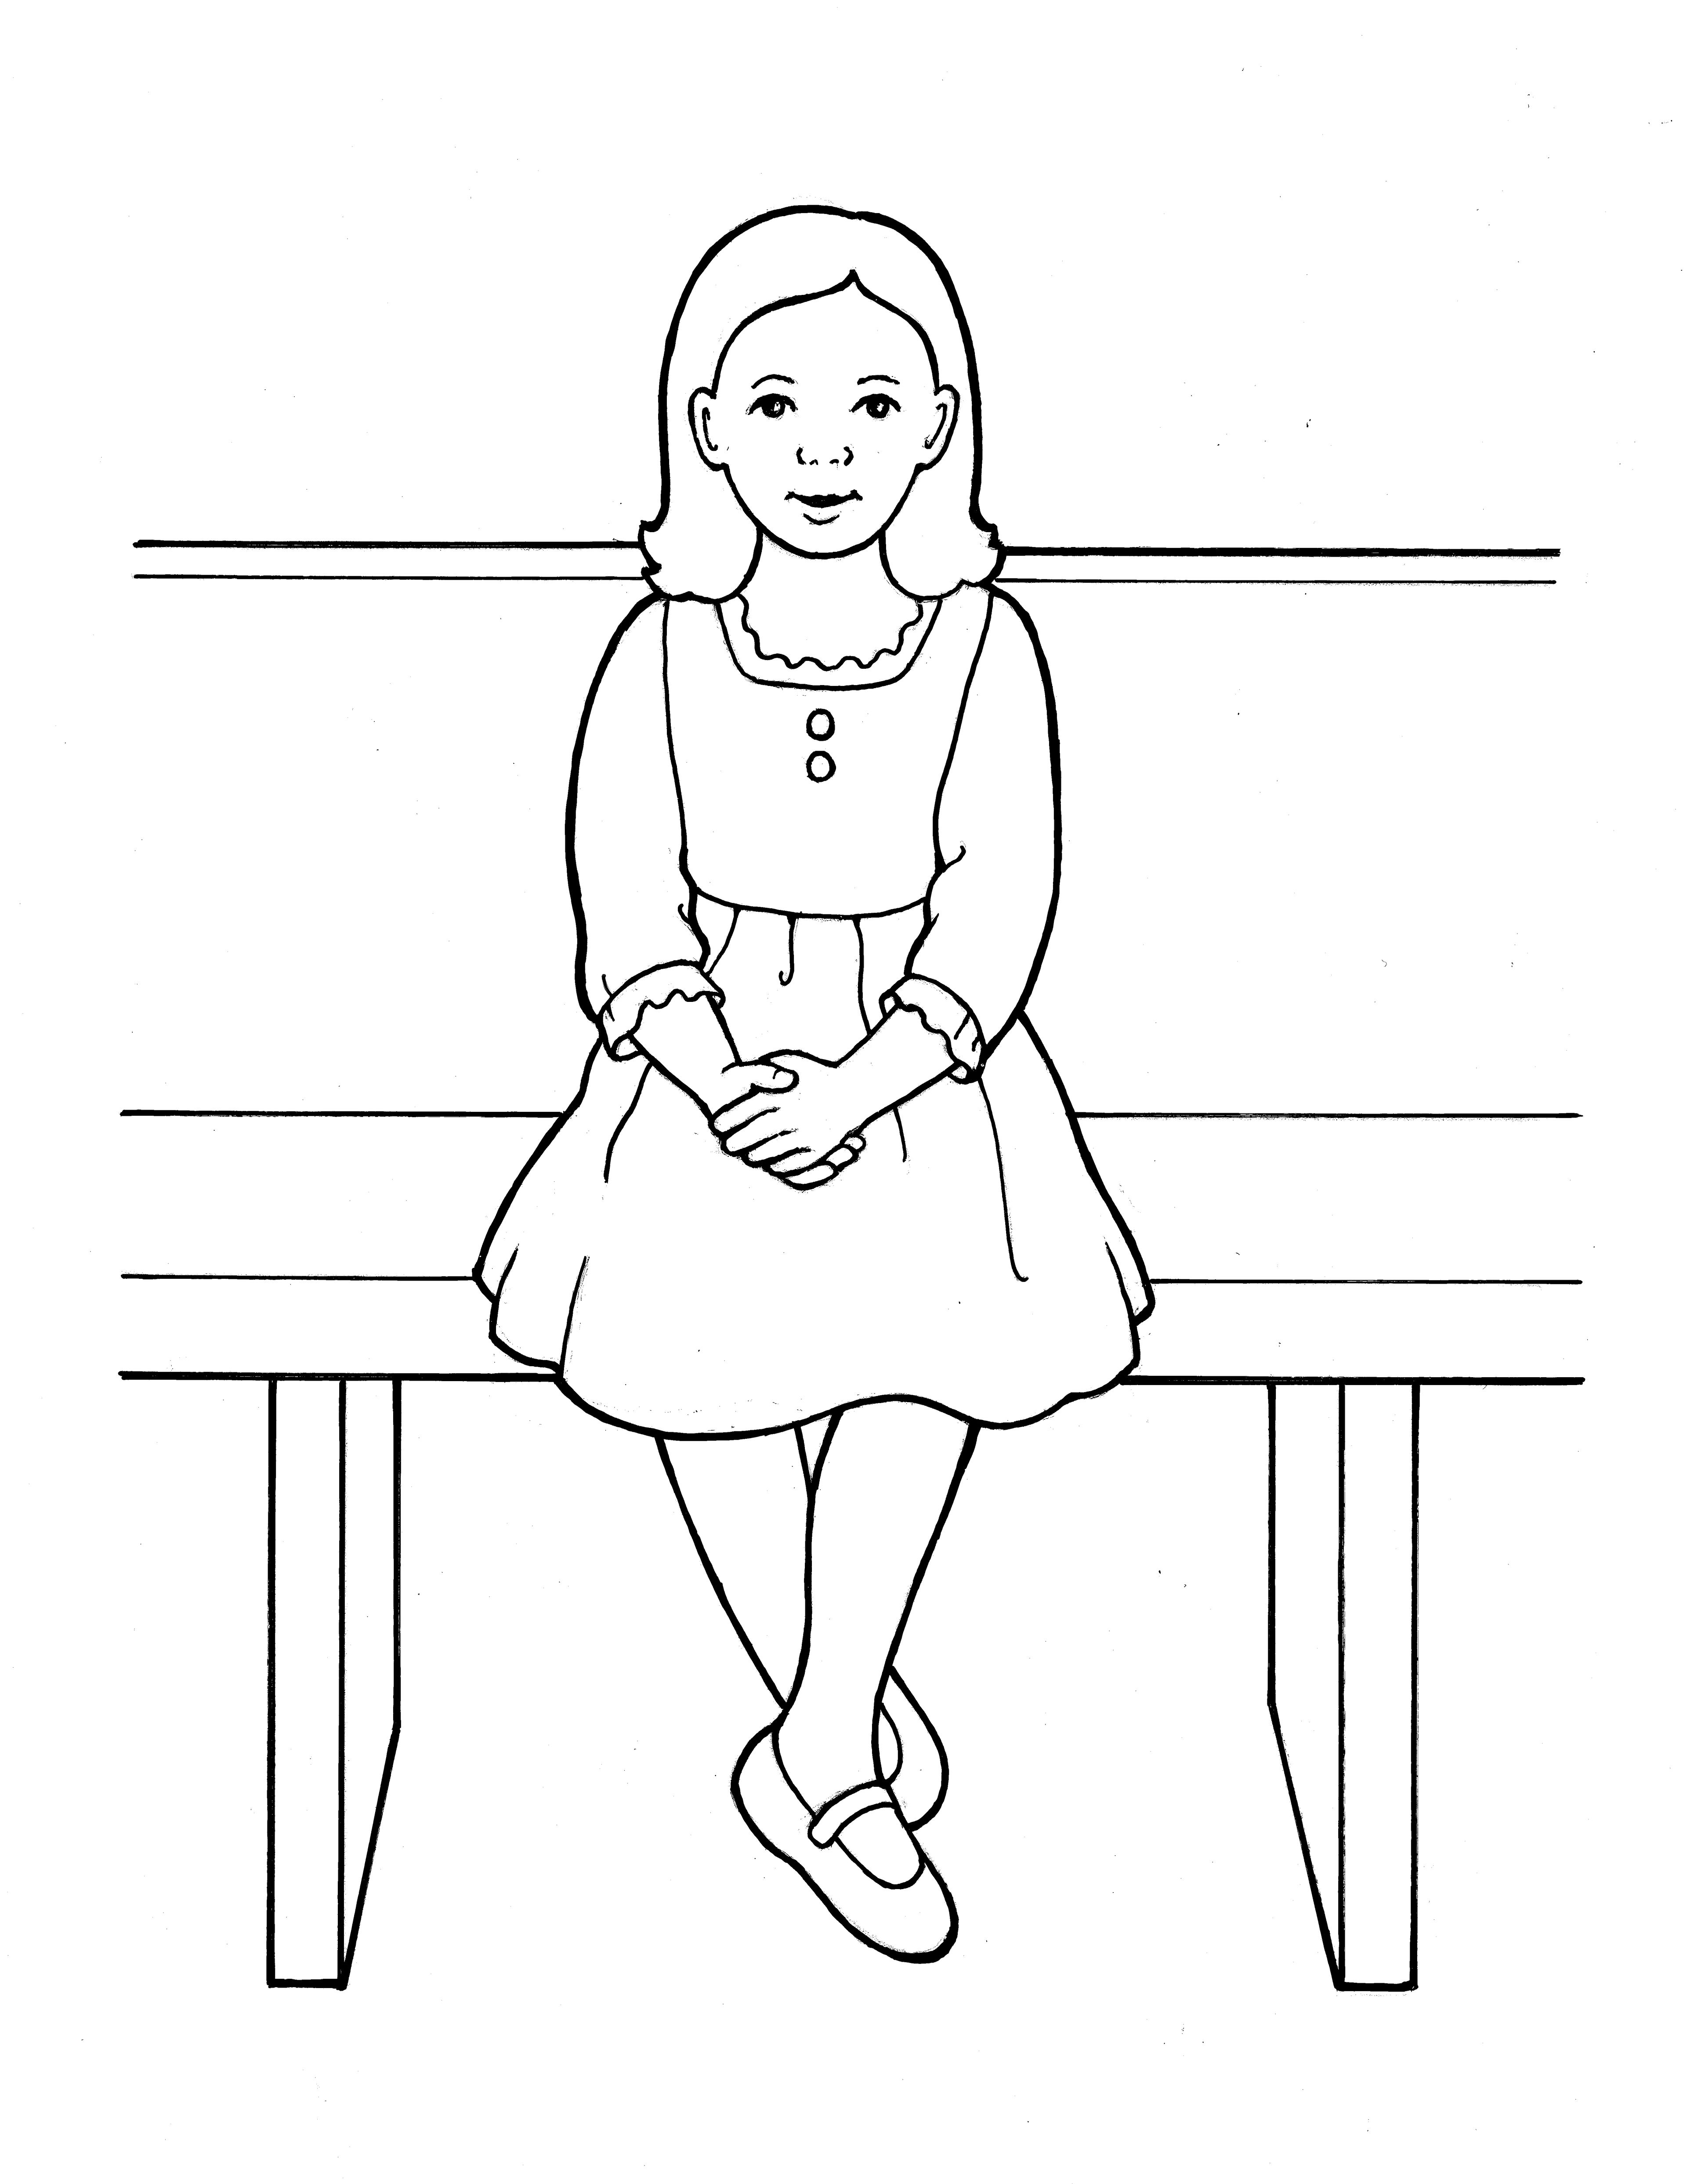 An illustration of a young girl sitting reverently with her hands folded in her lap.